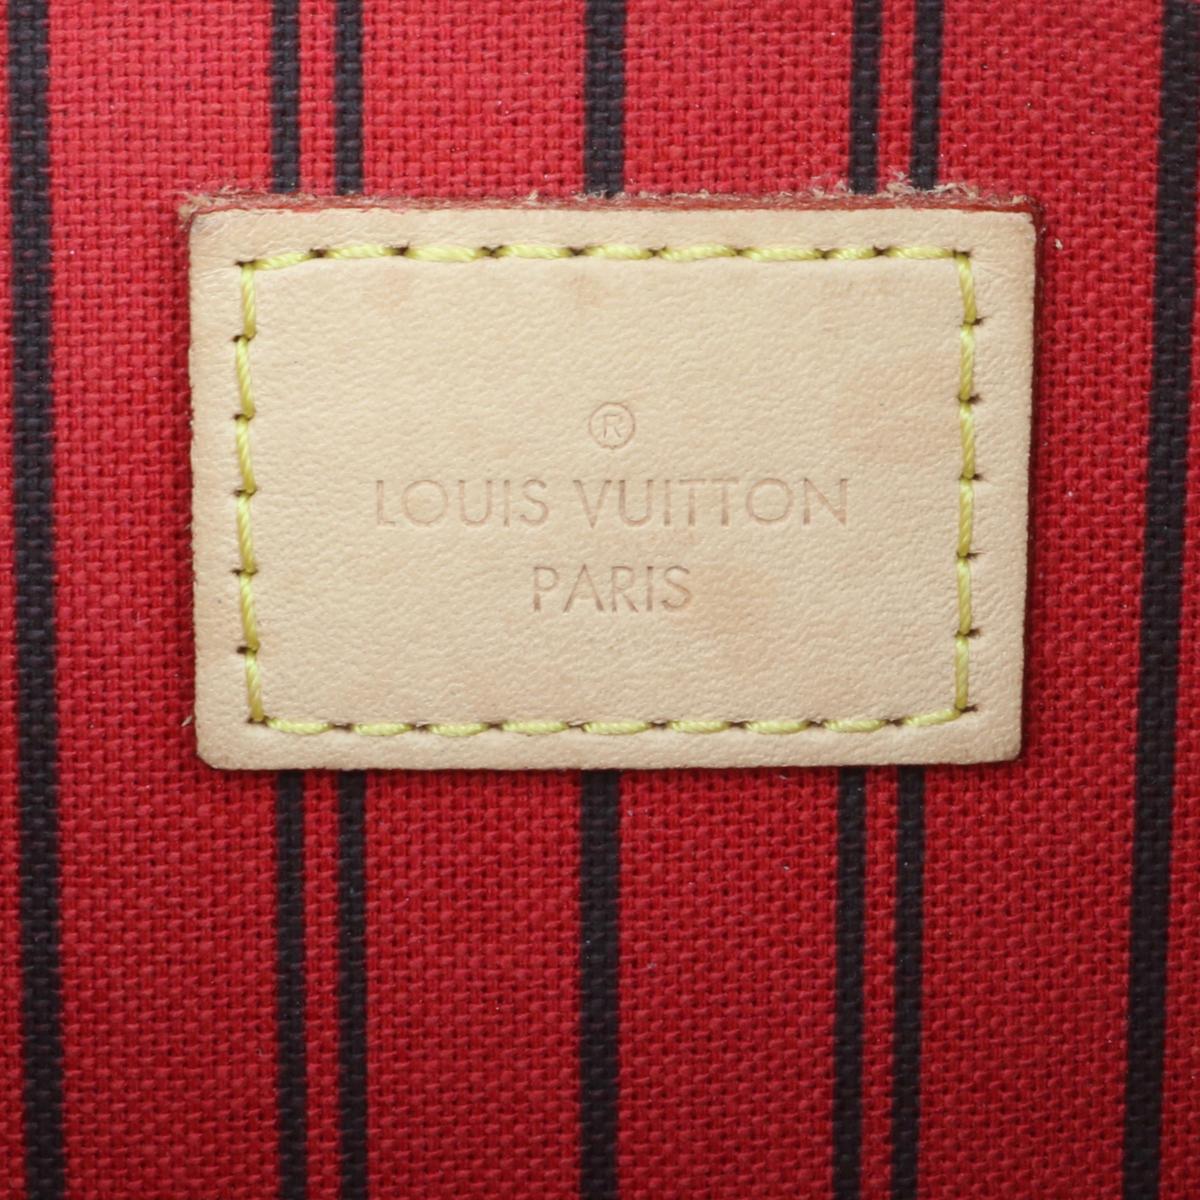 Louis Vuitton Neverfull MM Pochette Pouch in Monogram with Red Interior 2020 10